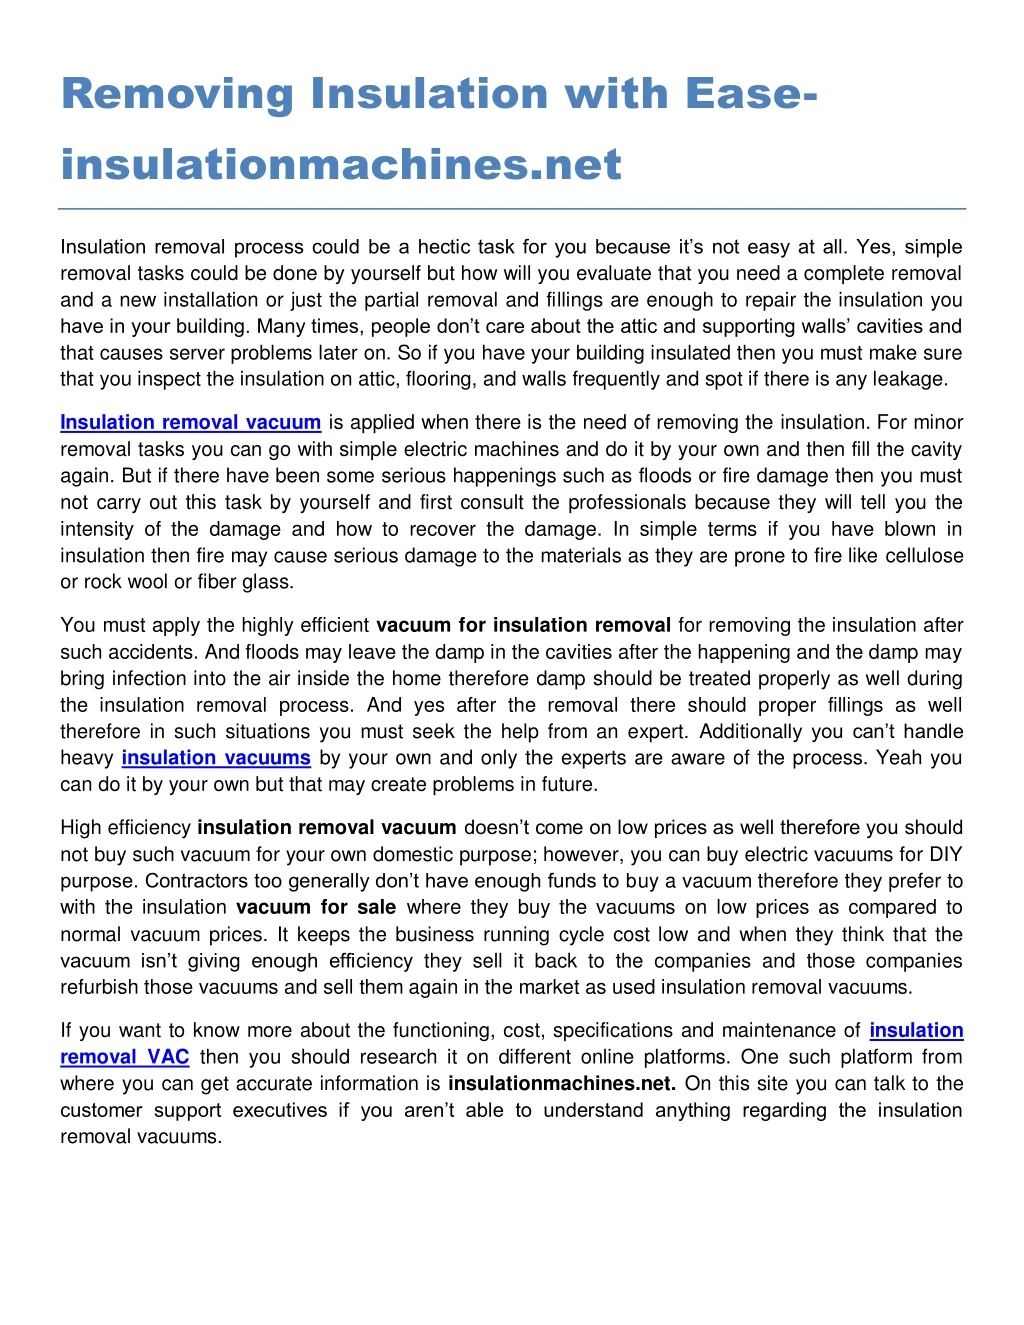 removing insulation with ease insulationmachines